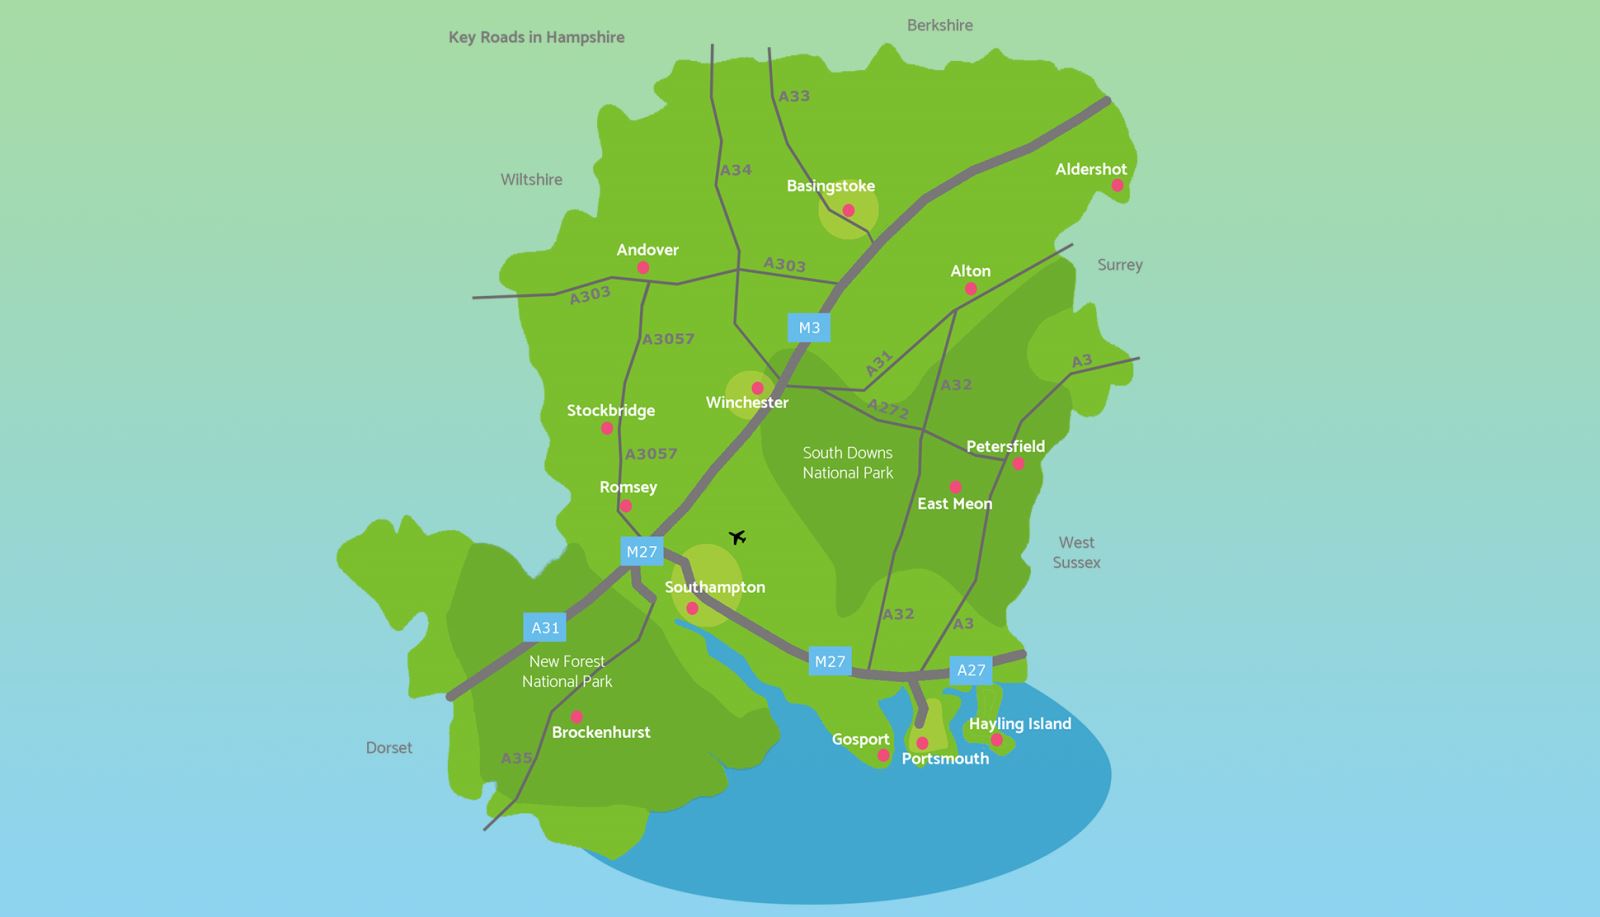 Map of Hampshire showing key roads, towns and cities